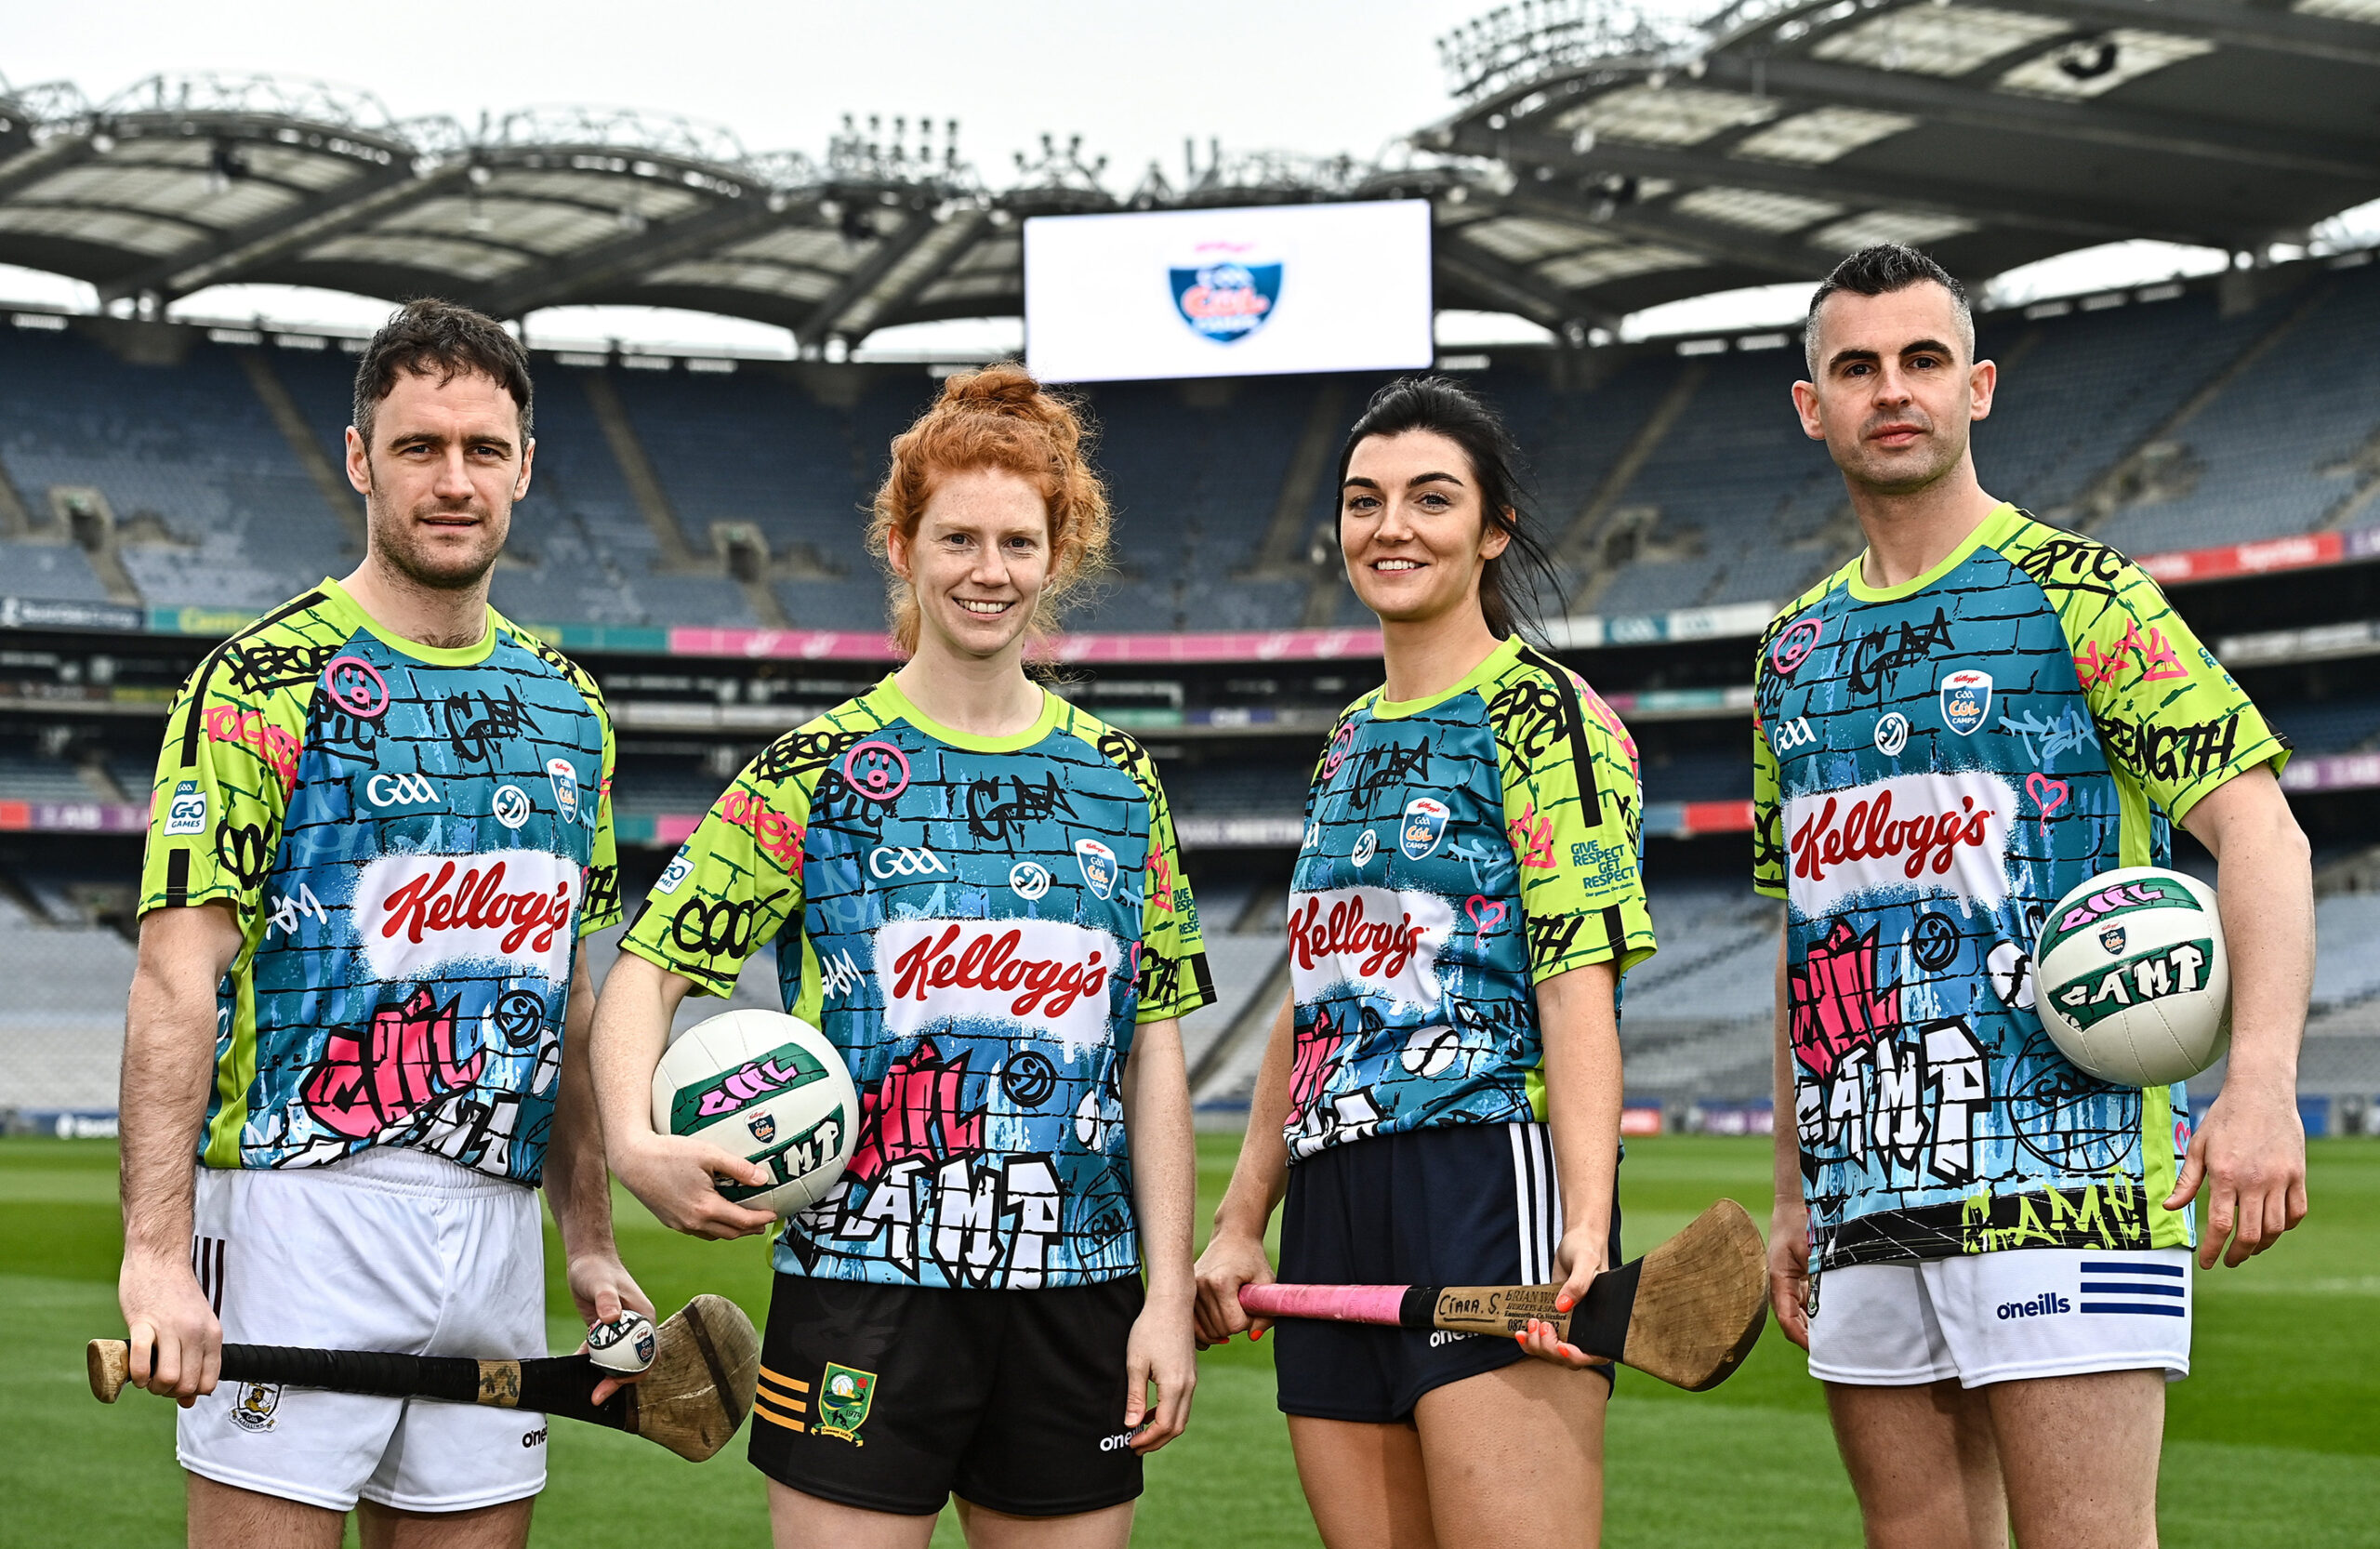 €40,000 up for grabs for all GAA clubs through Kellogg’s GAA Cúl Camps on-pack competition